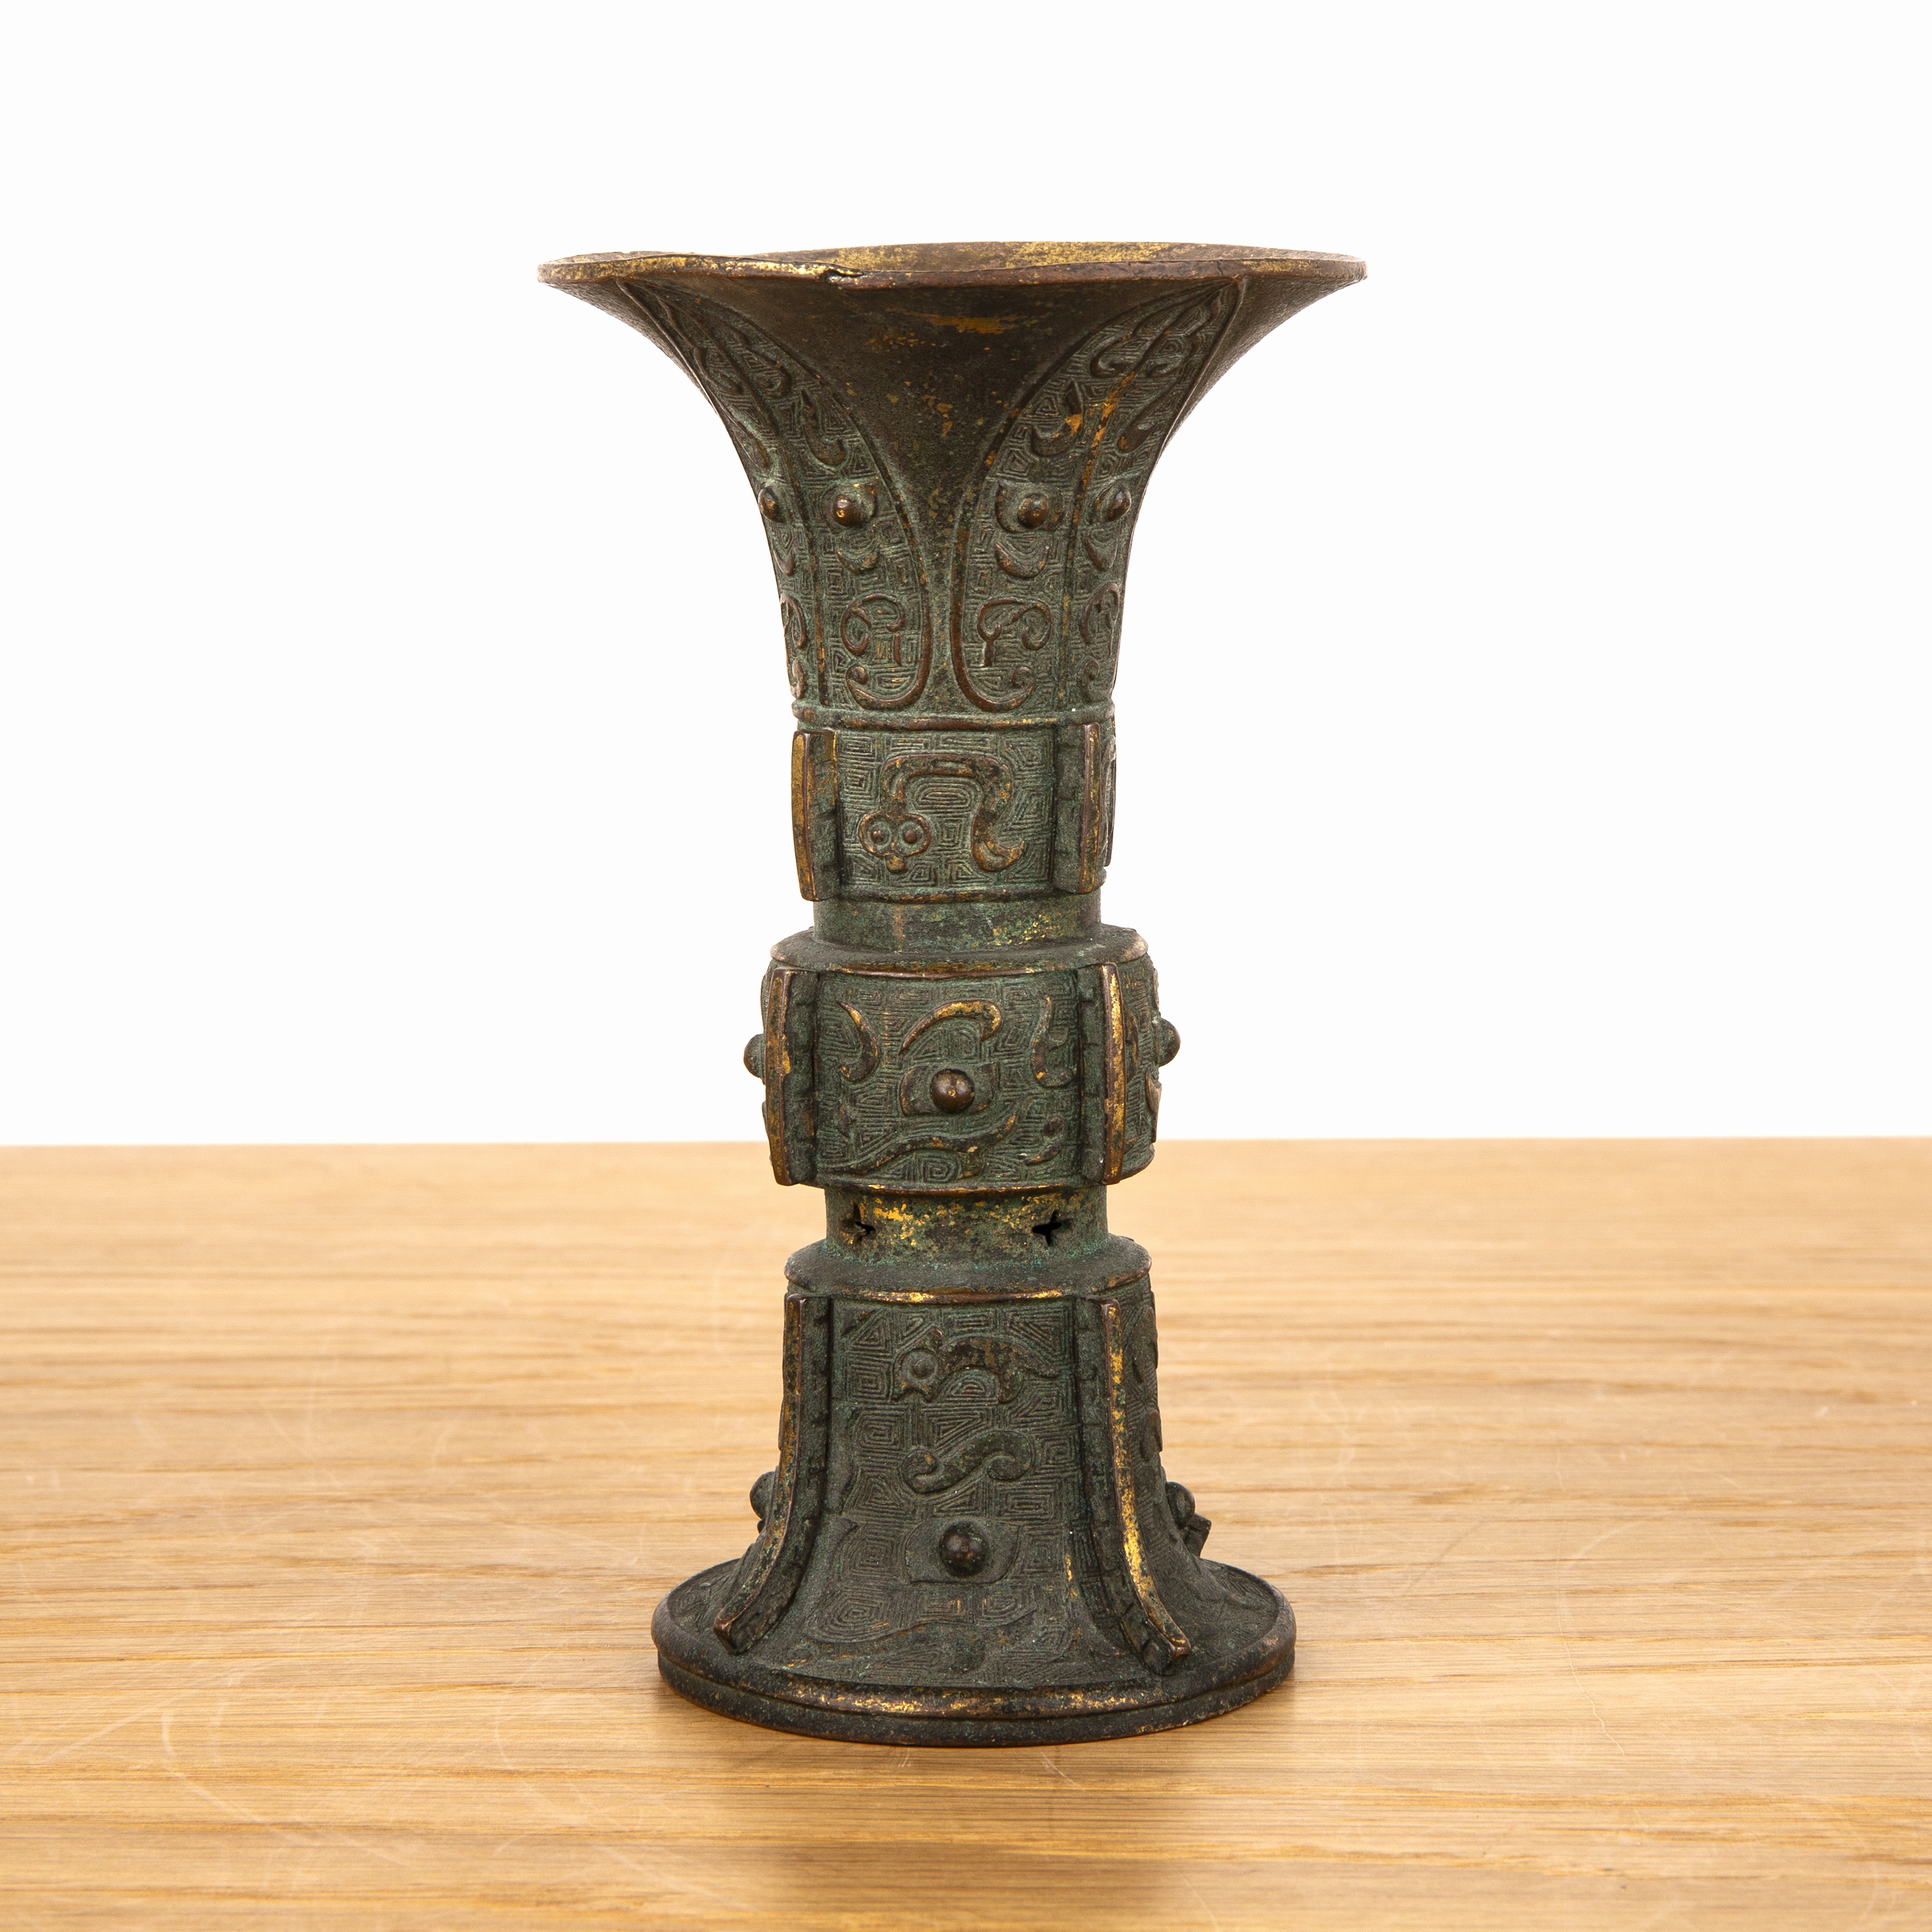 Gilt copper archaic form Gu form vessel Chinese, 17th/18th Century with taotie raised decoration, - Image 2 of 4